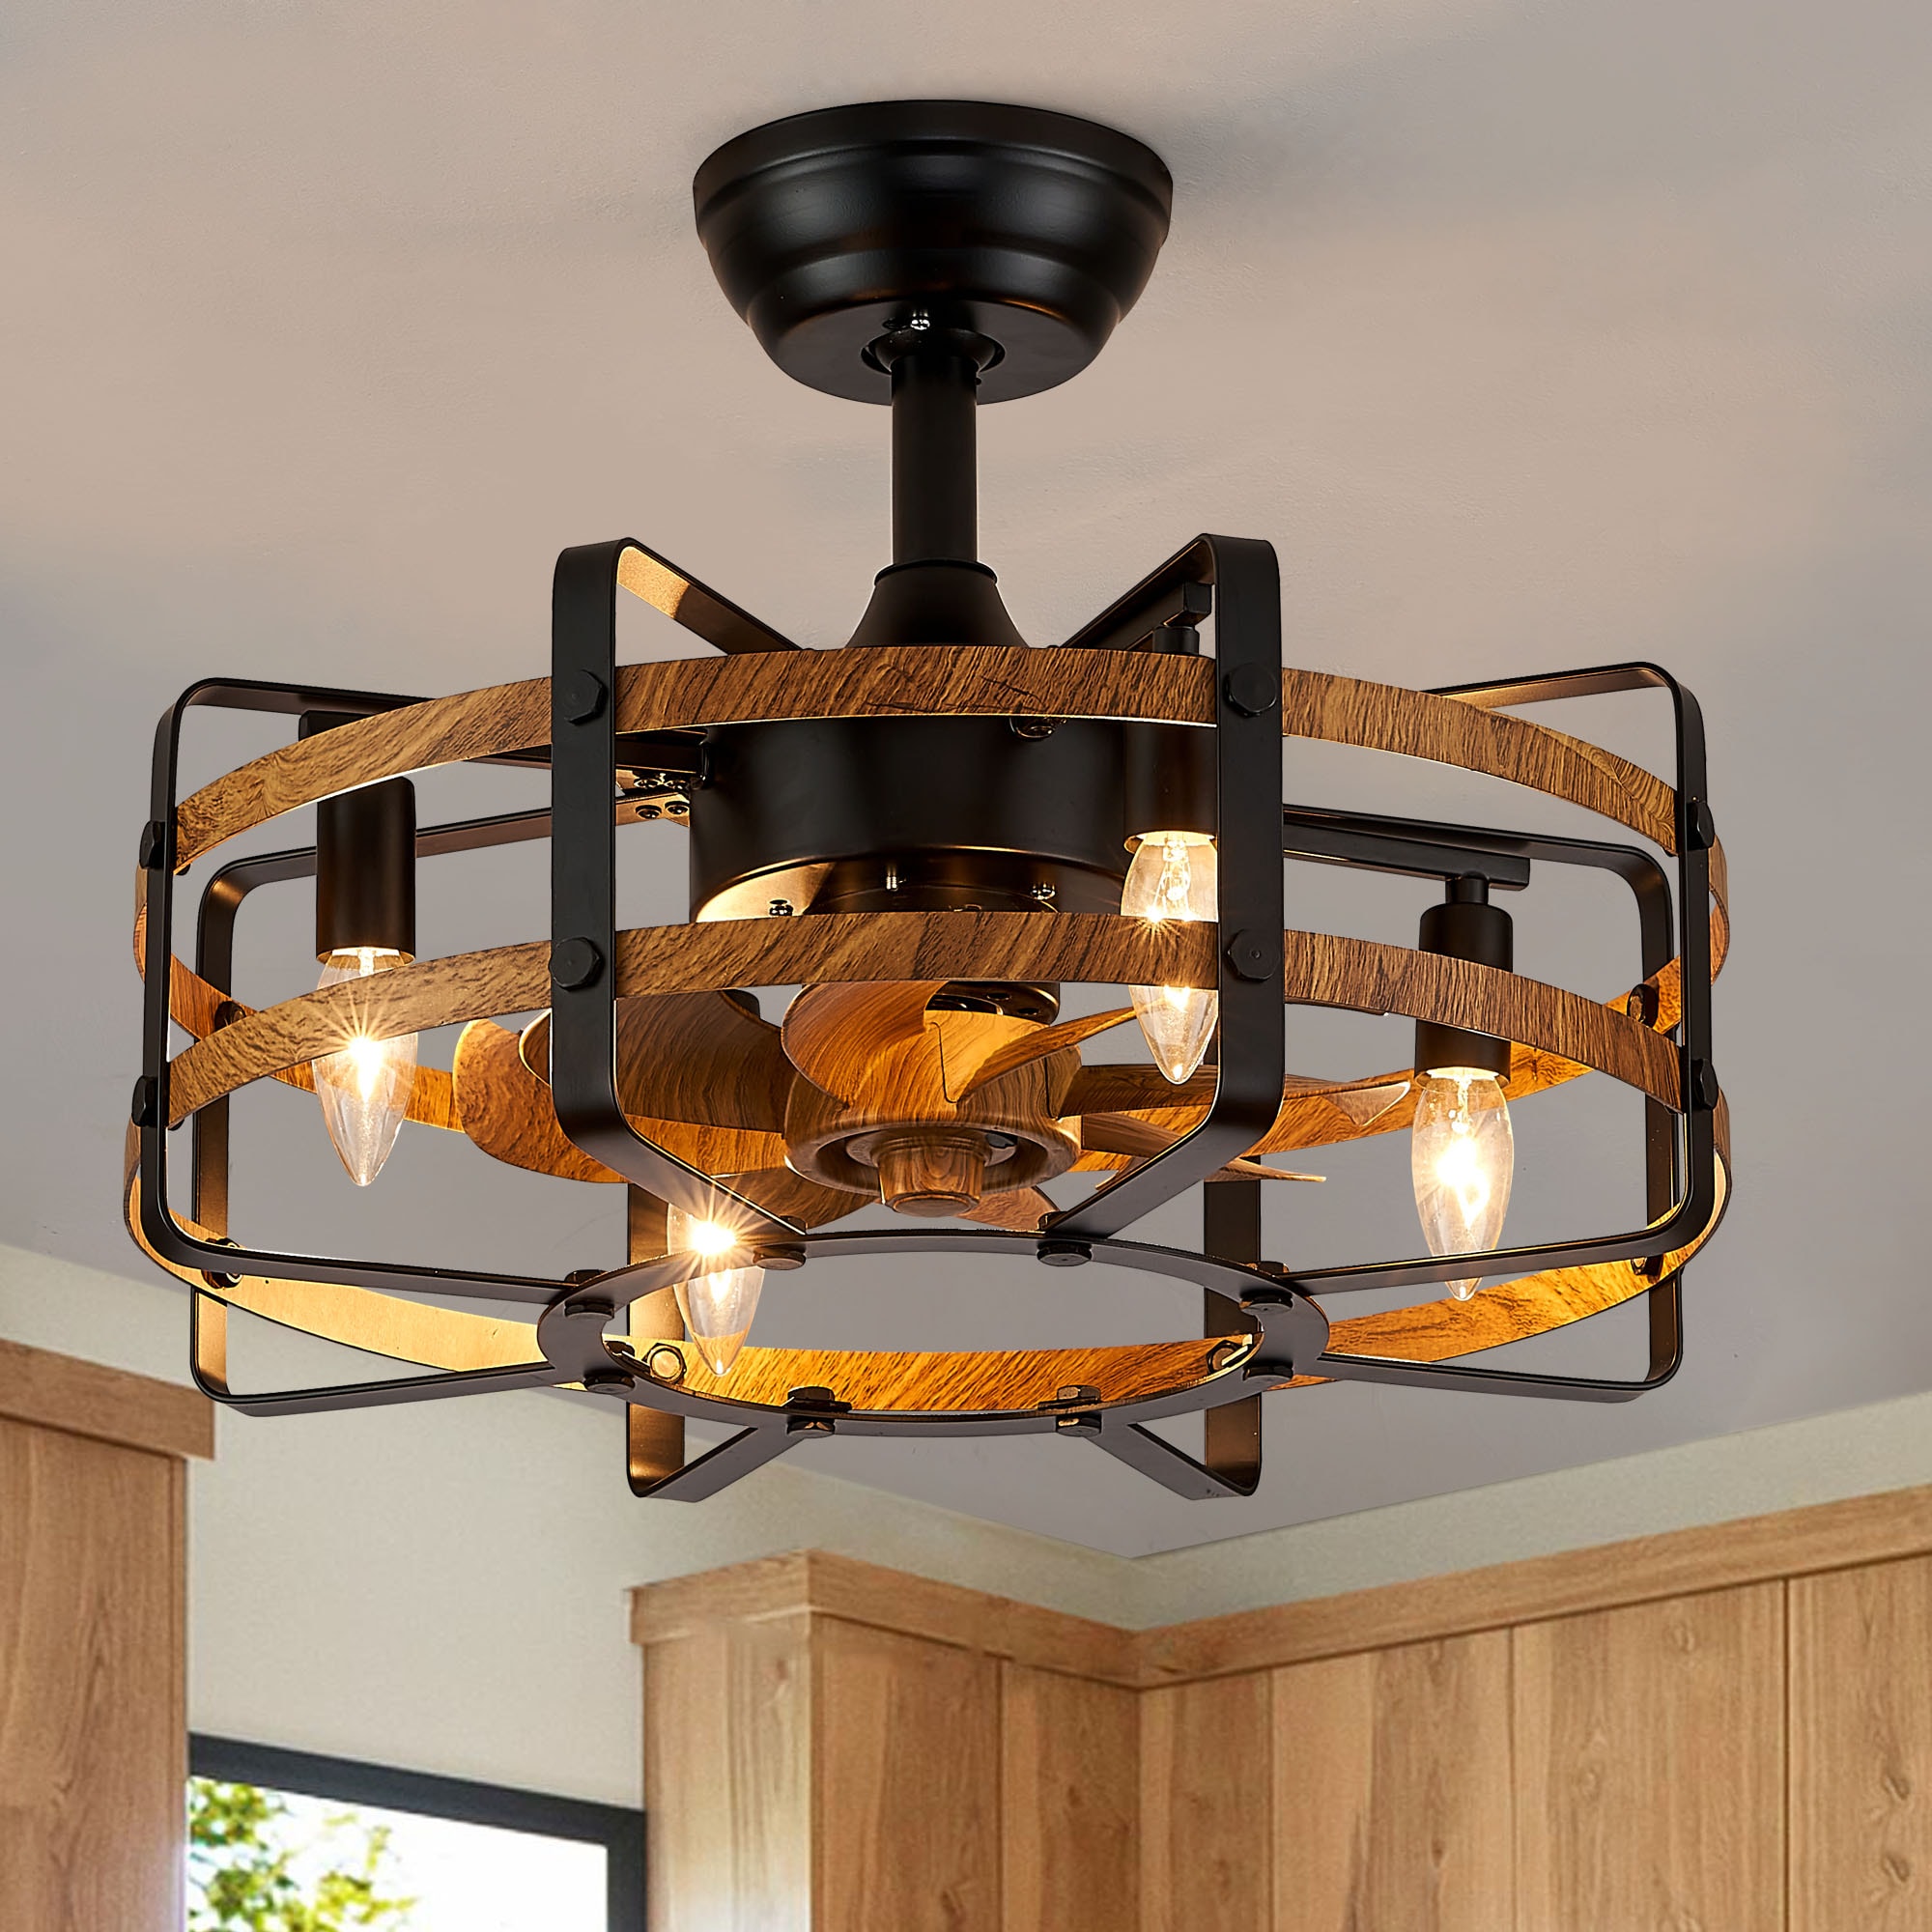 Cage Farmhouse Ceiling Wood 20-in Ceiling Modern Antoine Indoor department Profile Grain Fan Fans Remote and at Black Fandelier the Low (8-Blade) in